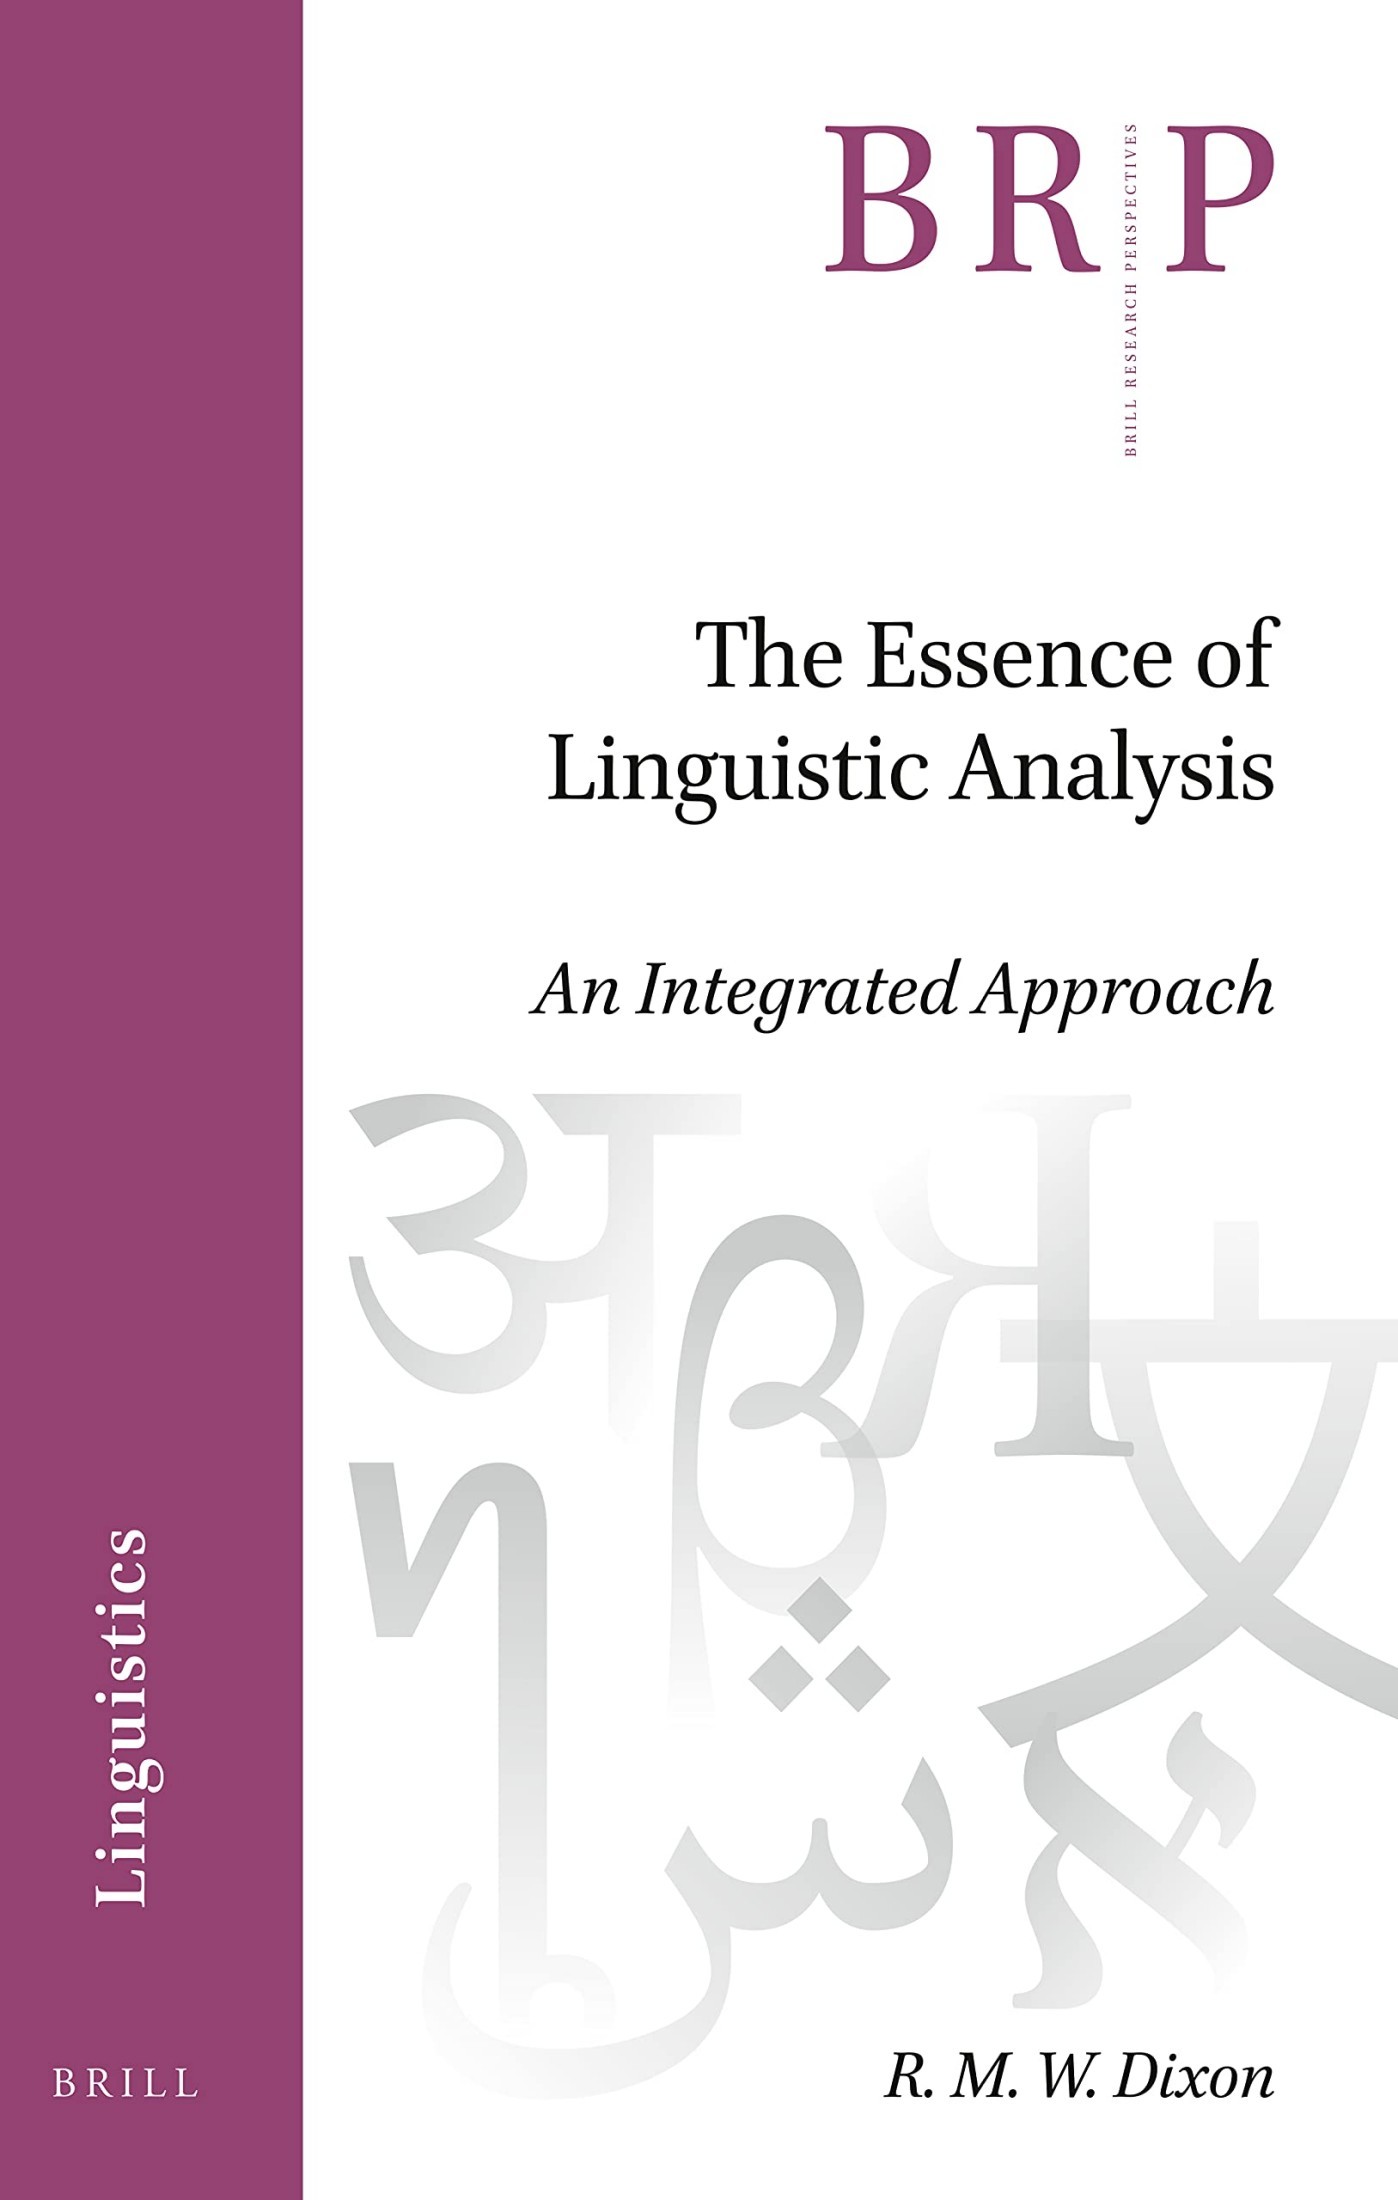 The Essence of Linguistic Analysis: An Integrated Approach